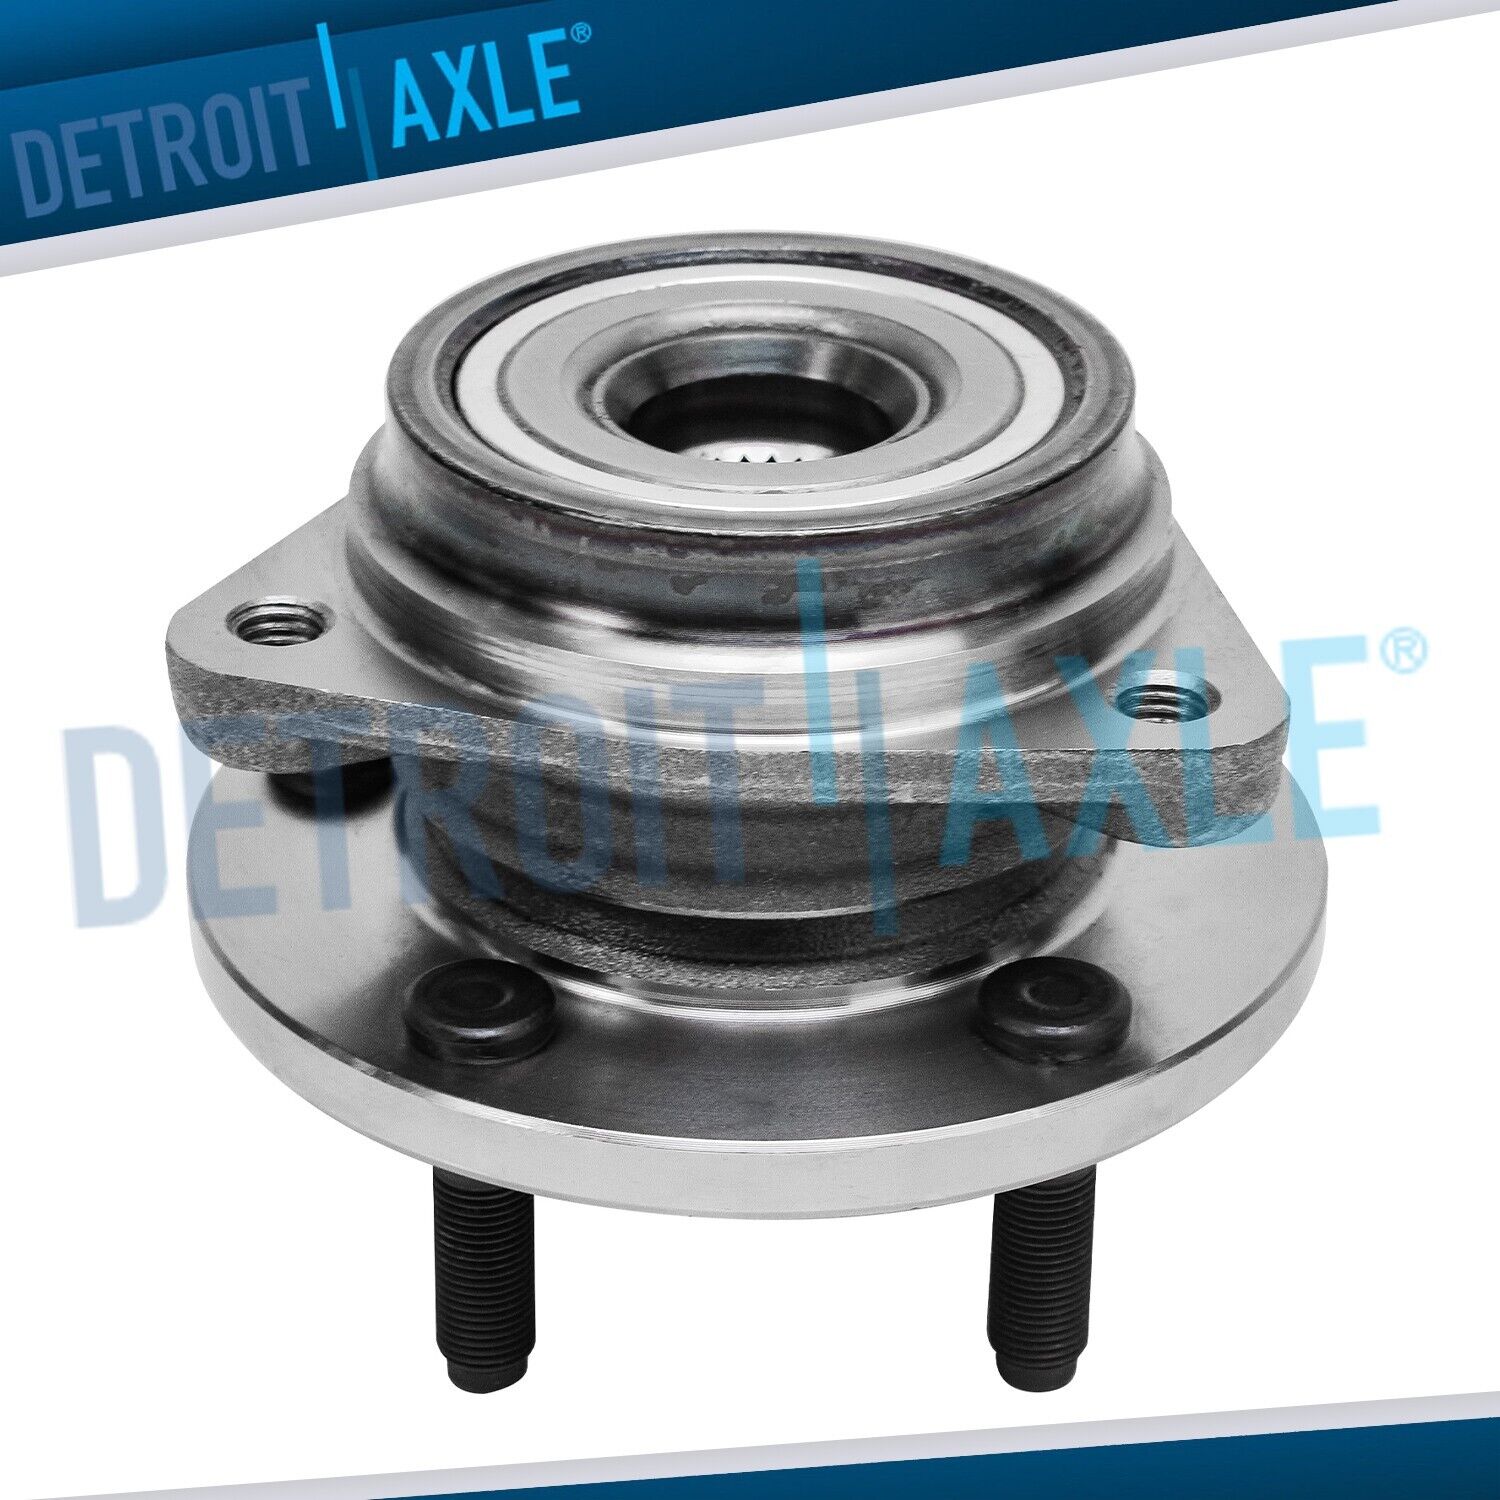 AWD Front Wheel Bearing & Hub Assembly for 1990 1991 1992 - 1997 Ford Aerostar